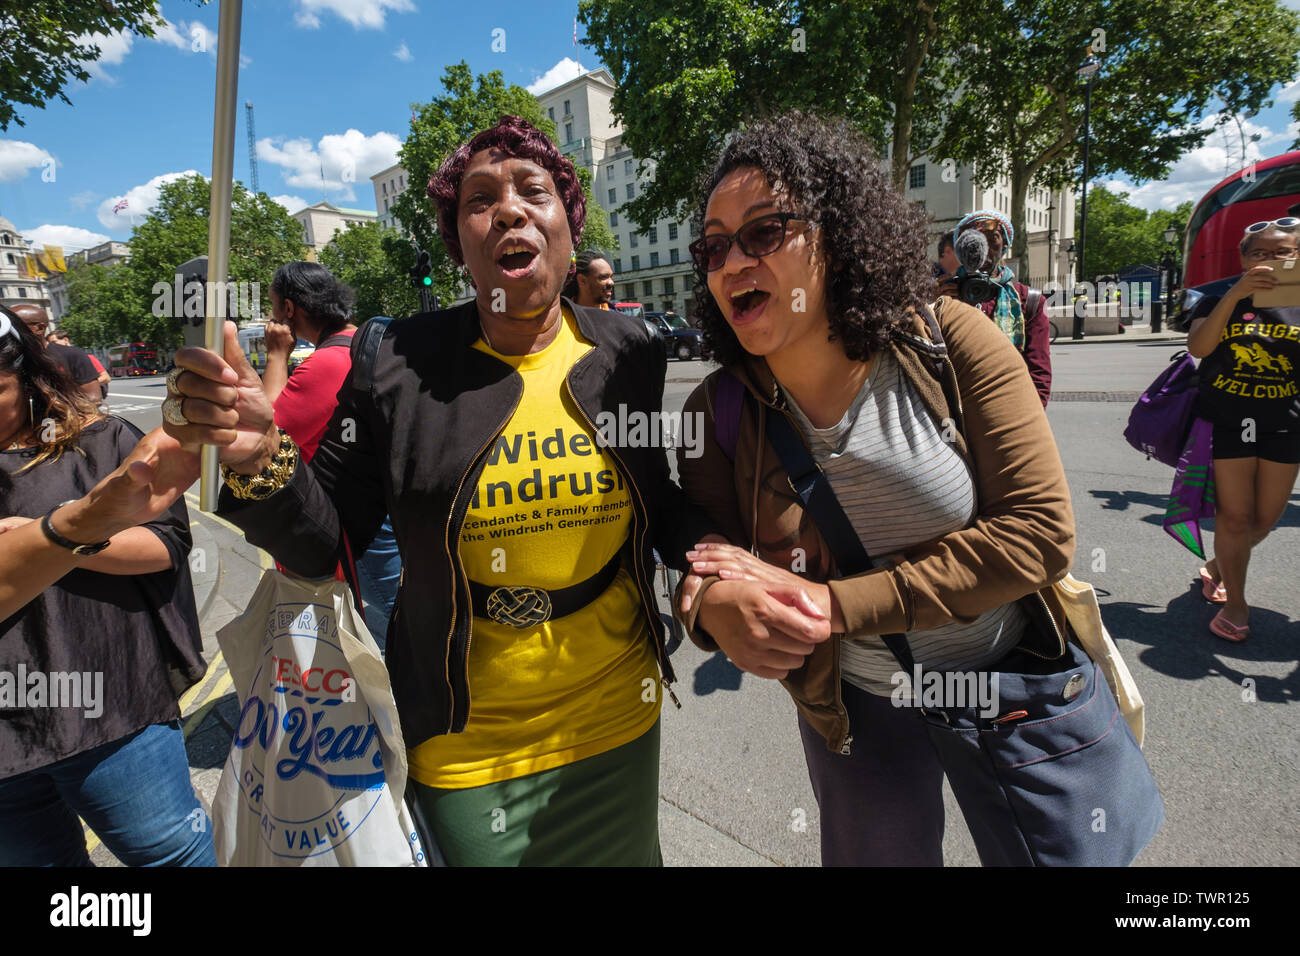 London, UK. 22nd June 2019. Eulalee a Jamaican Grandmother who was detained in Yarls Wood and Antonia from Movement for Justice outside Downing St as 7 UK cities take part in the National Windrush Day of Action calling for justice and full compensation for victims of the Windrush scandal, their multi-generation families and other communities targeted under the hostile environment for detention and deportation. After a rally at Downing St they marched to Westminster Bridge to lower banners over it and then block the road for some final speeches. Peter Marshall/Alamy Live News Credit: Peter Mars Stock Photo